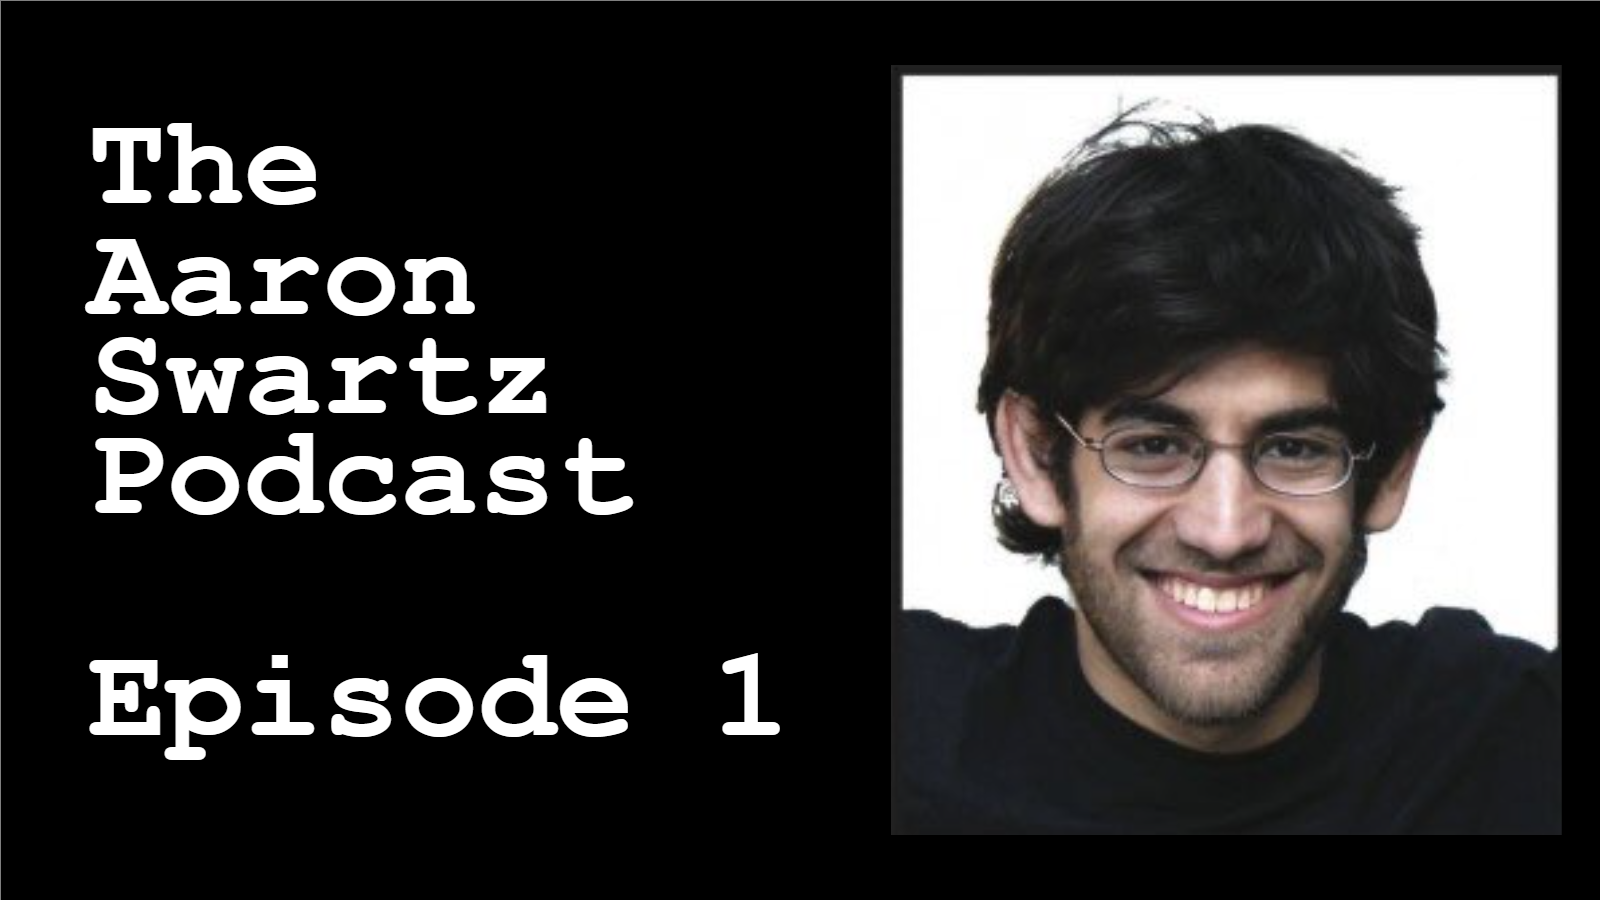 "The Aaron Swartz Podcast" with a photo of Aaron Swartz